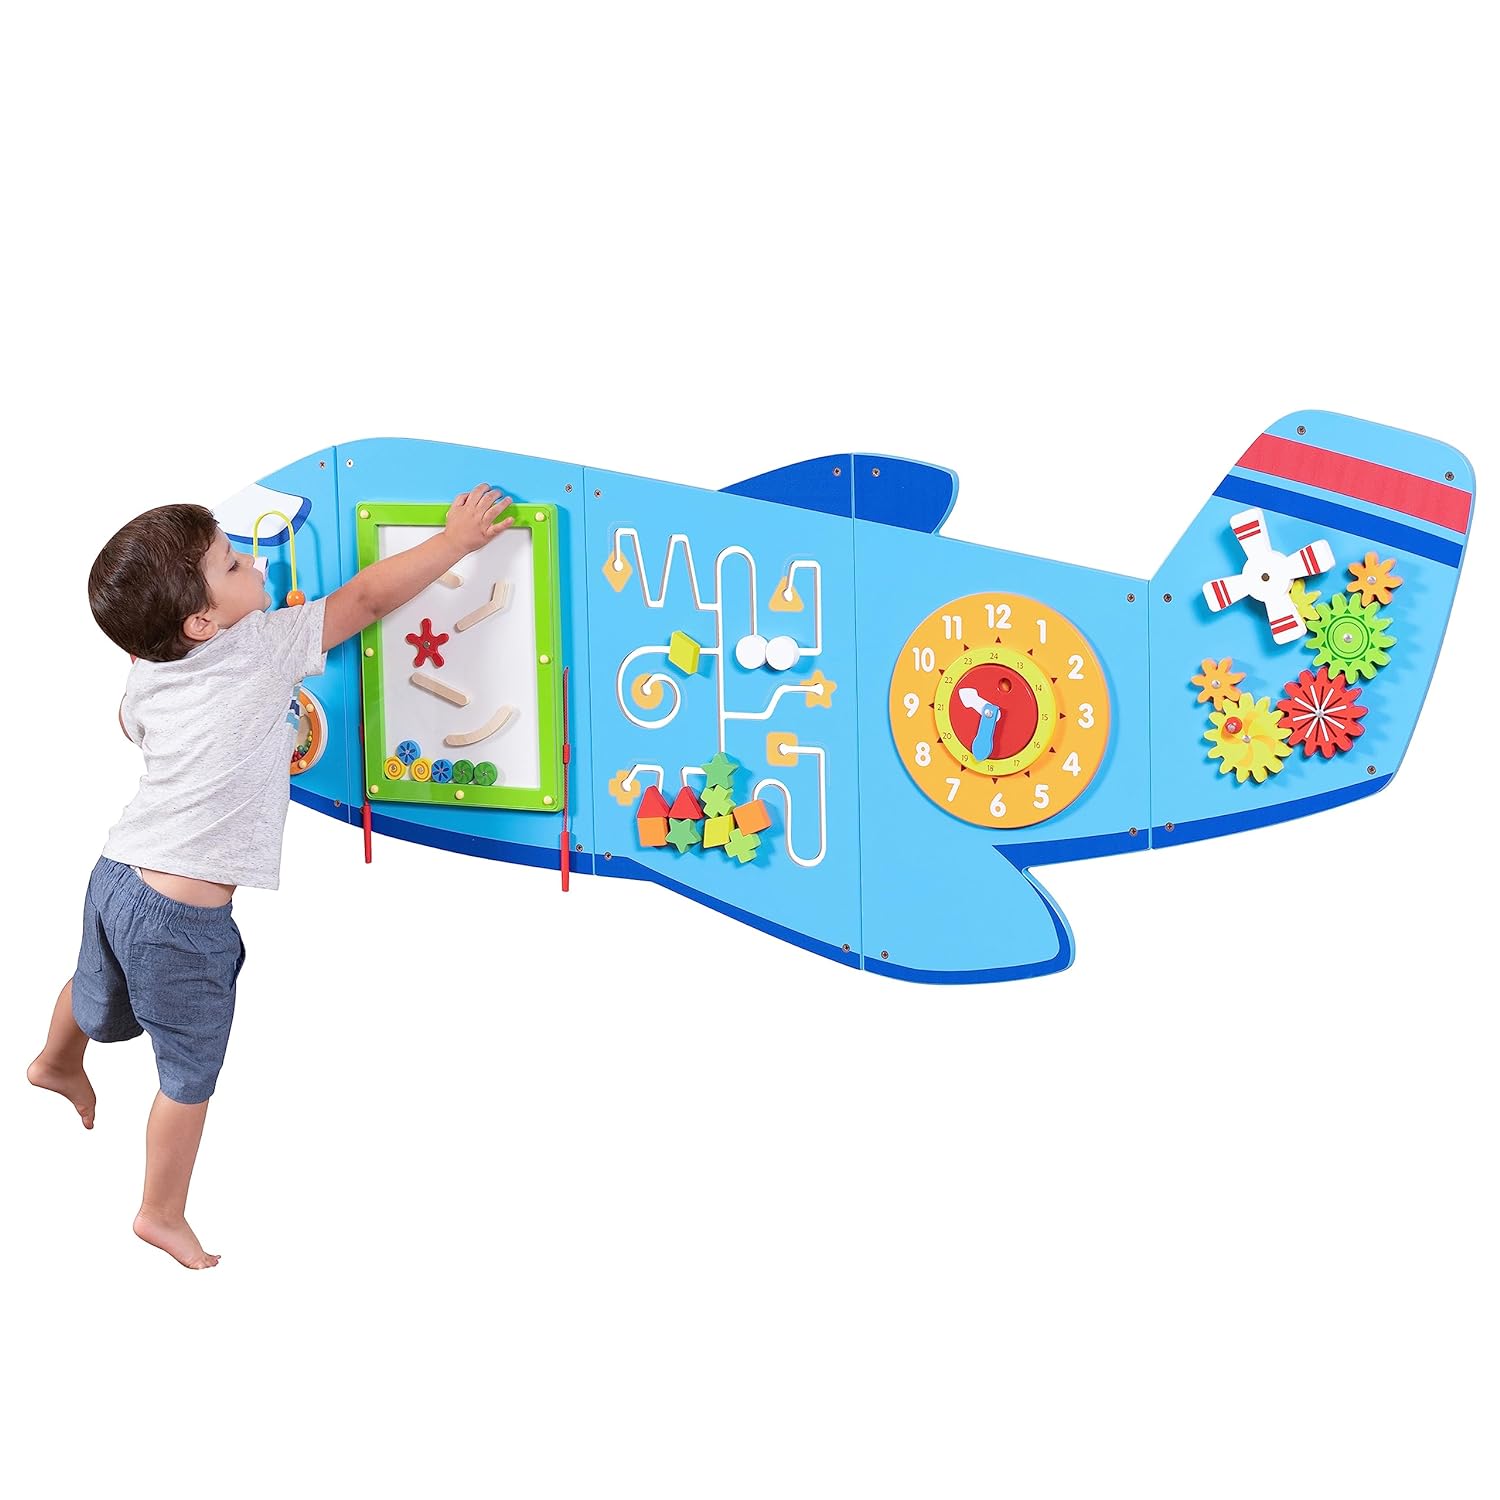  Airplane Activity Wall Panels for children with autism